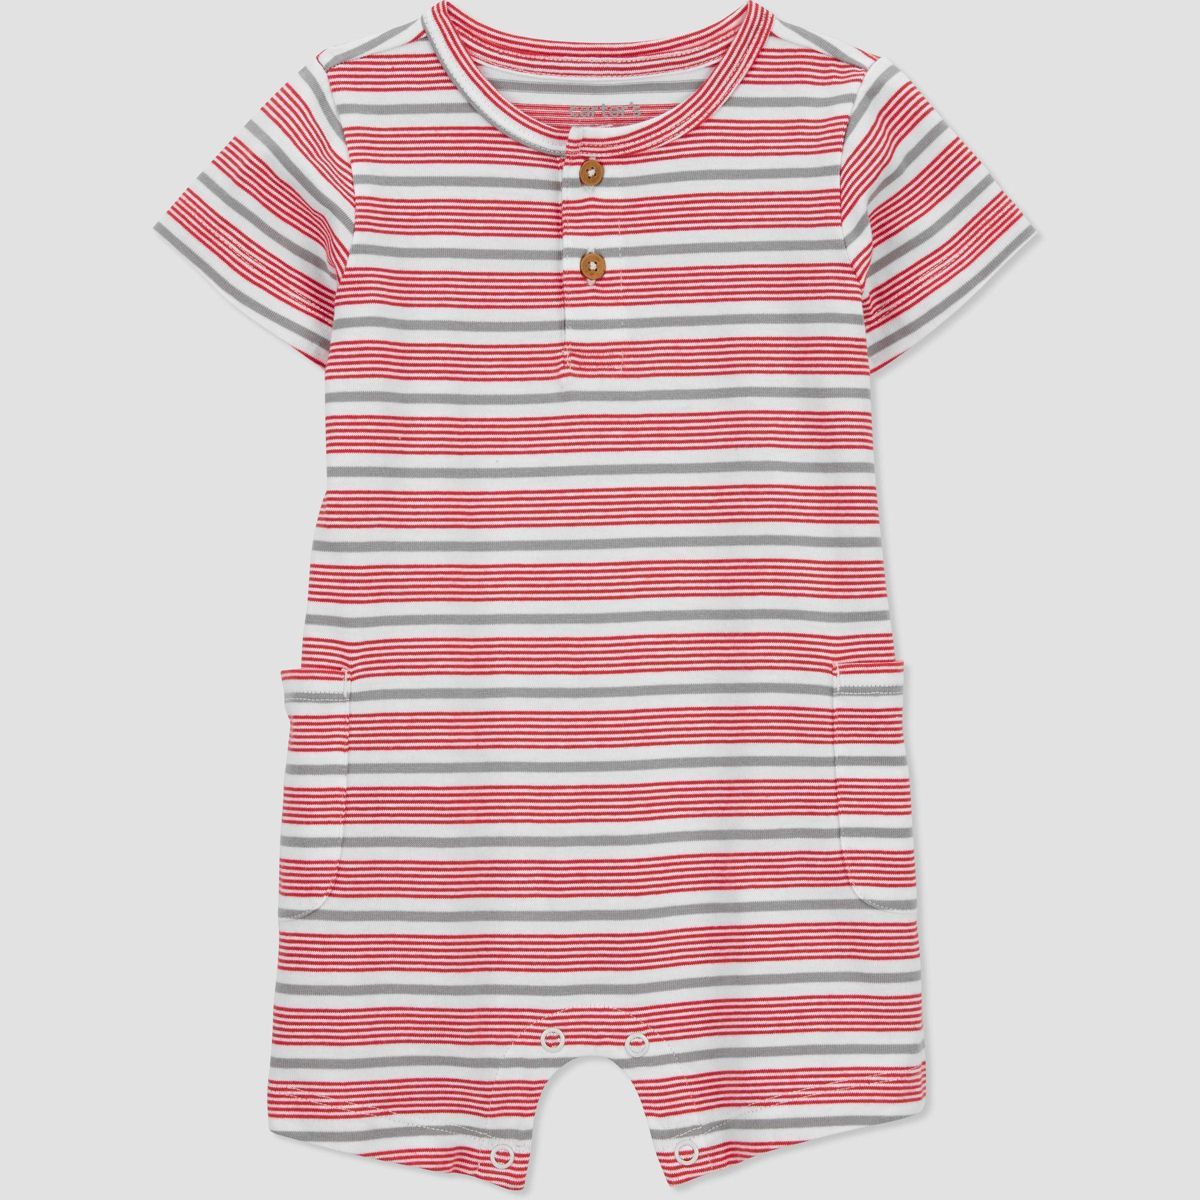 Carter's Just One You®️ Baby Boys' Striped Romper - Orange | Target